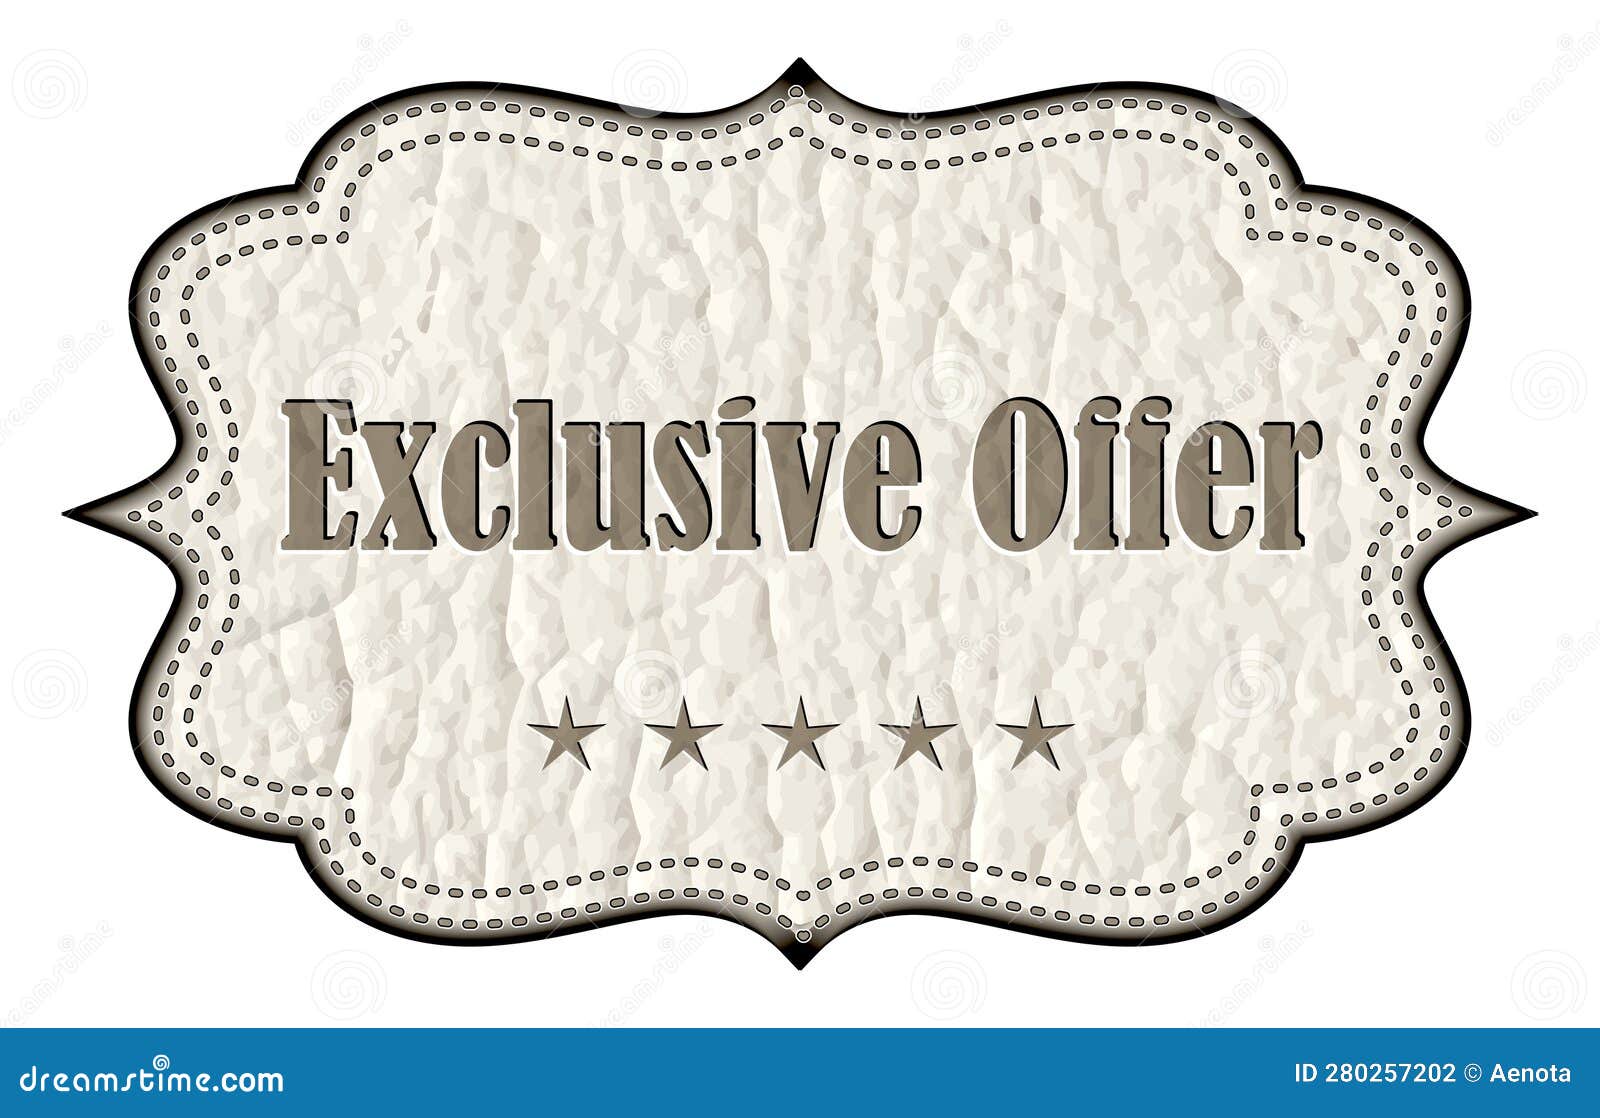 Leather Tag Exclusive Offer Stock Vector Illustration of pressing 